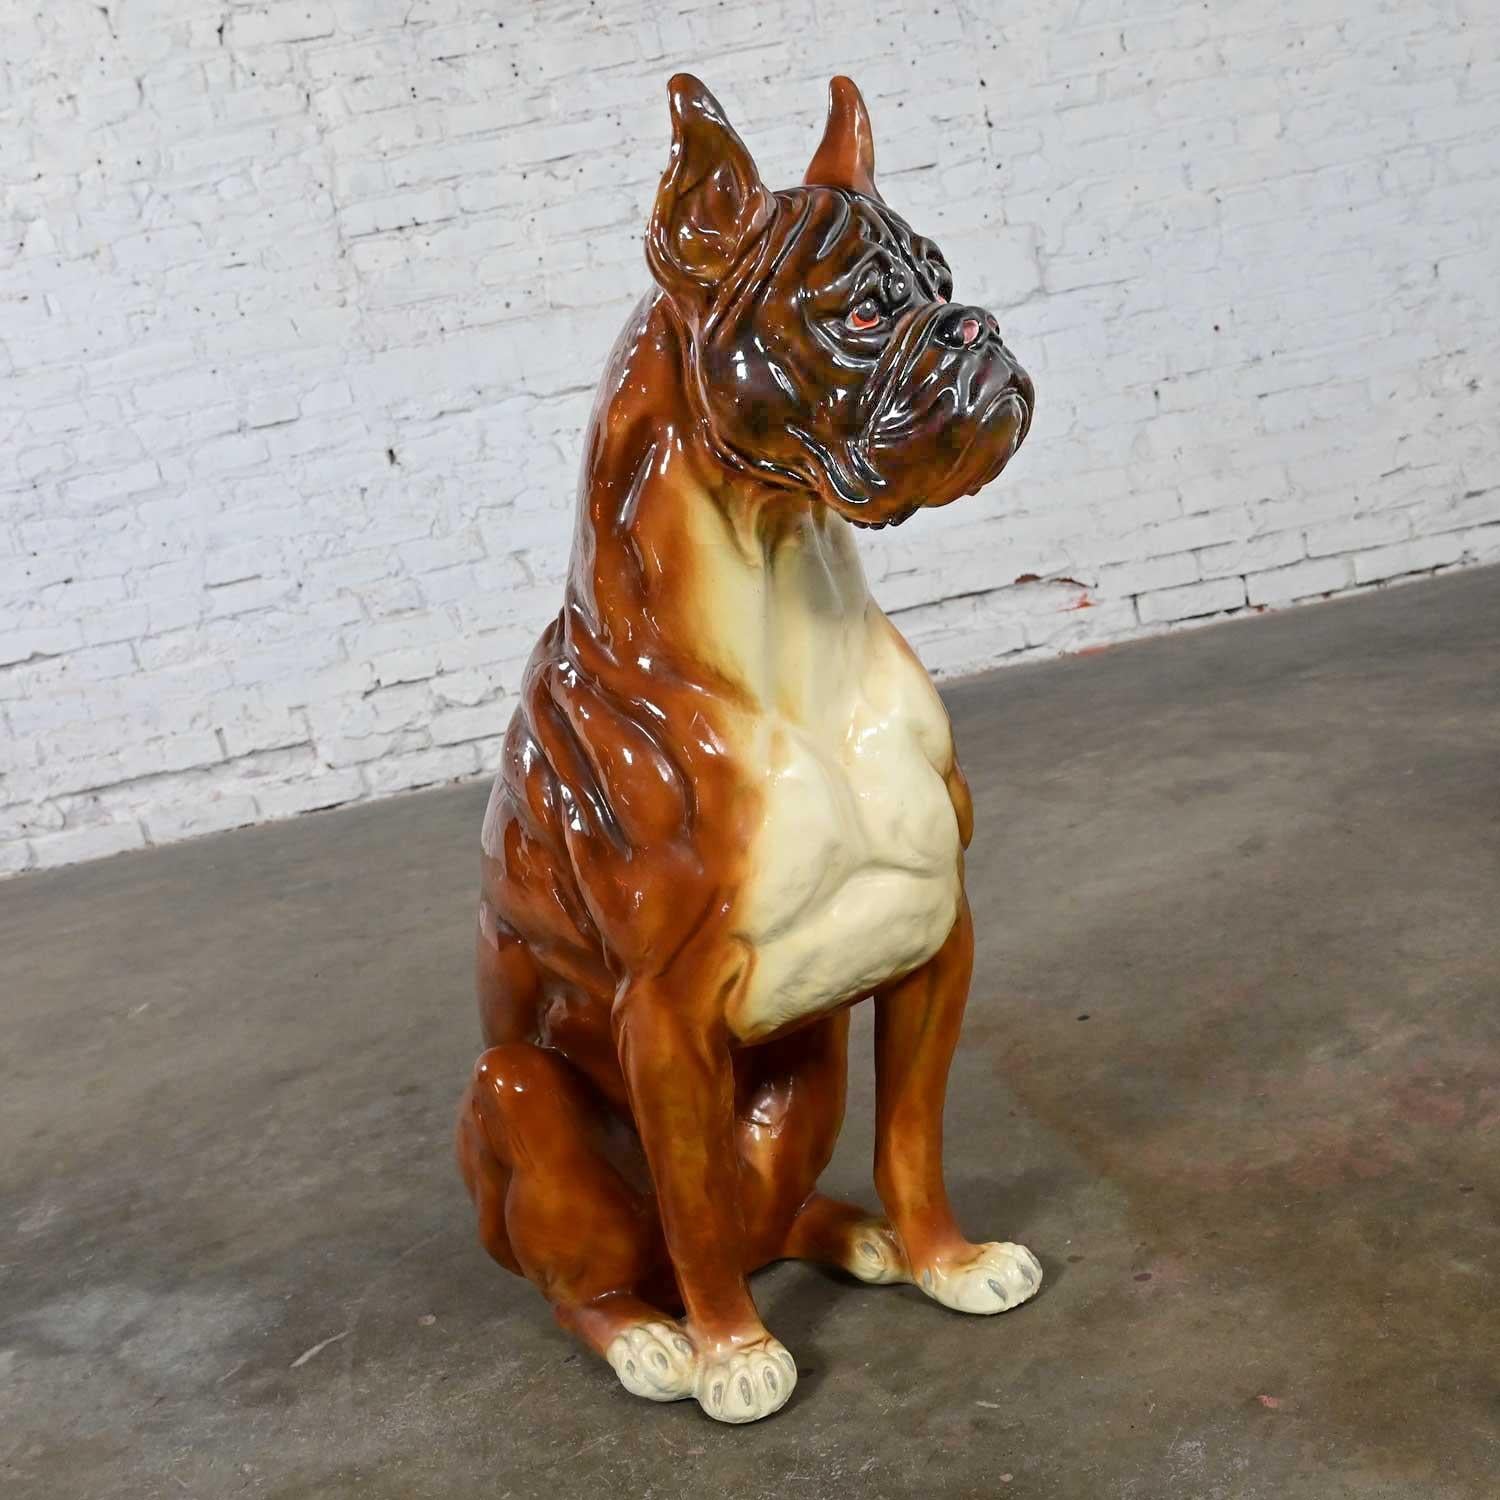 Handsome vintage Marwal Industries style large scale molded resin boxer dog statue or sculpture. Beautiful condition, keeping in mind that this is vintage and not new so will have signs of use and wear. Please see photos and zoom in for details. We